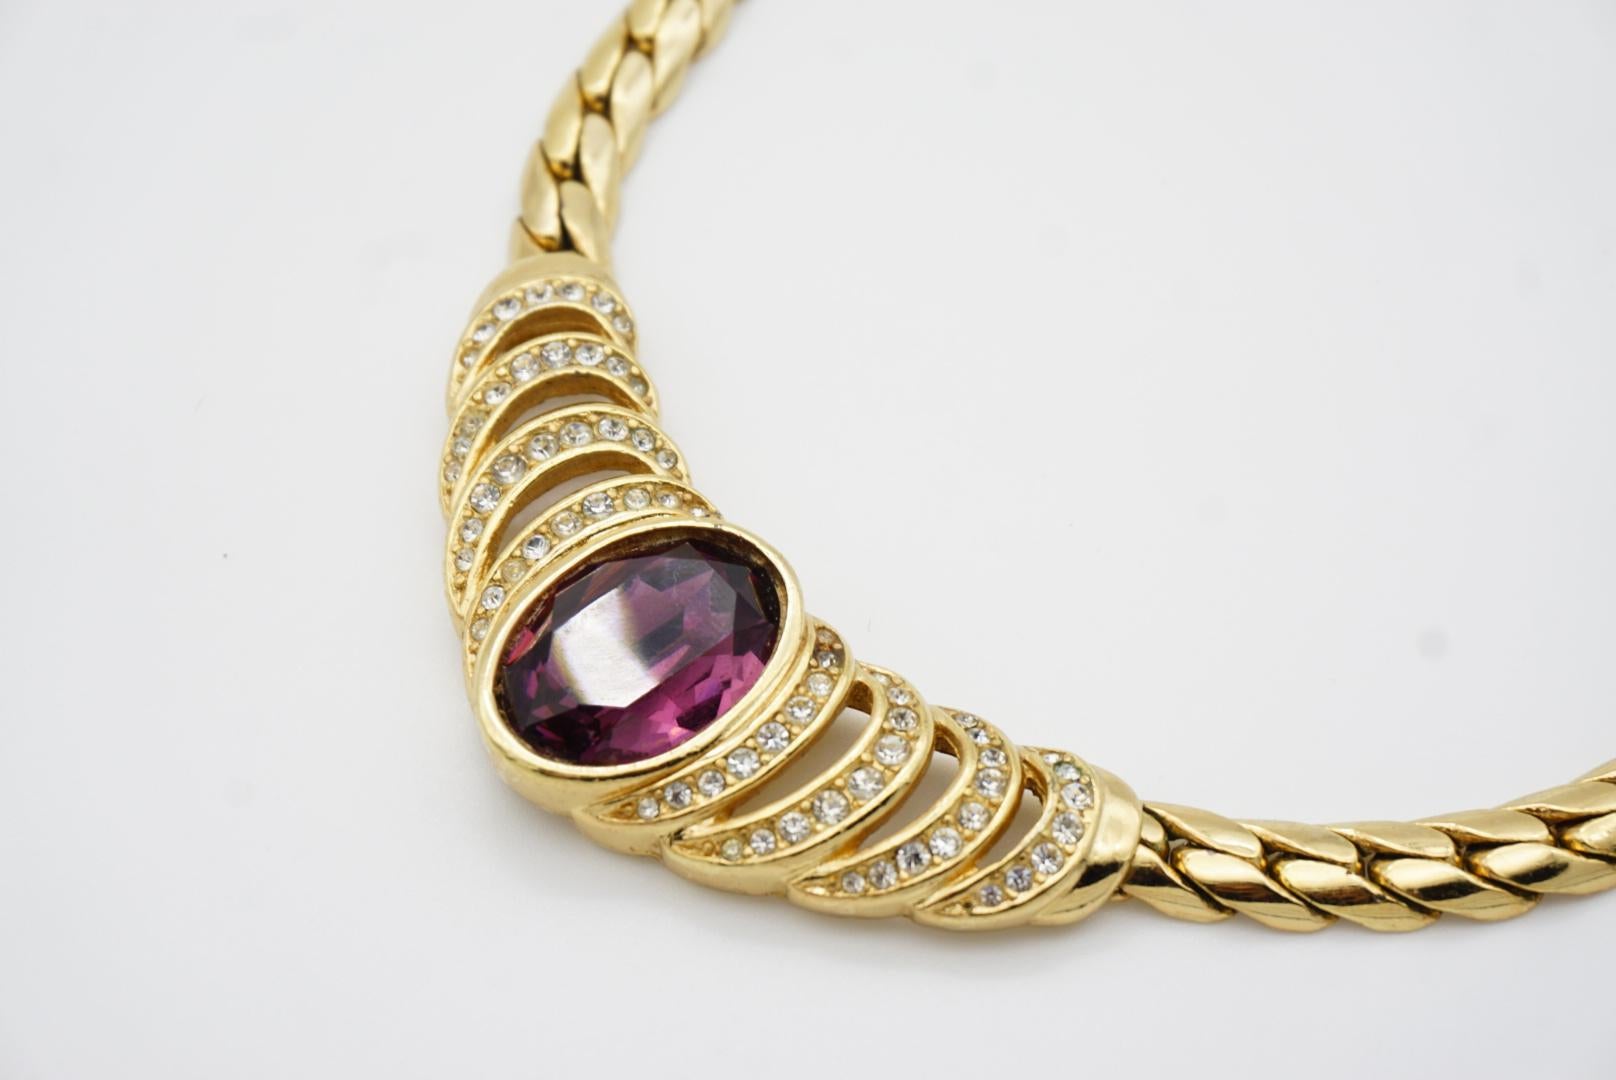 Christian Dior Vintage 1980s Large Oval Amethyst Crystals Gold Openwork Necklace For Sale 4